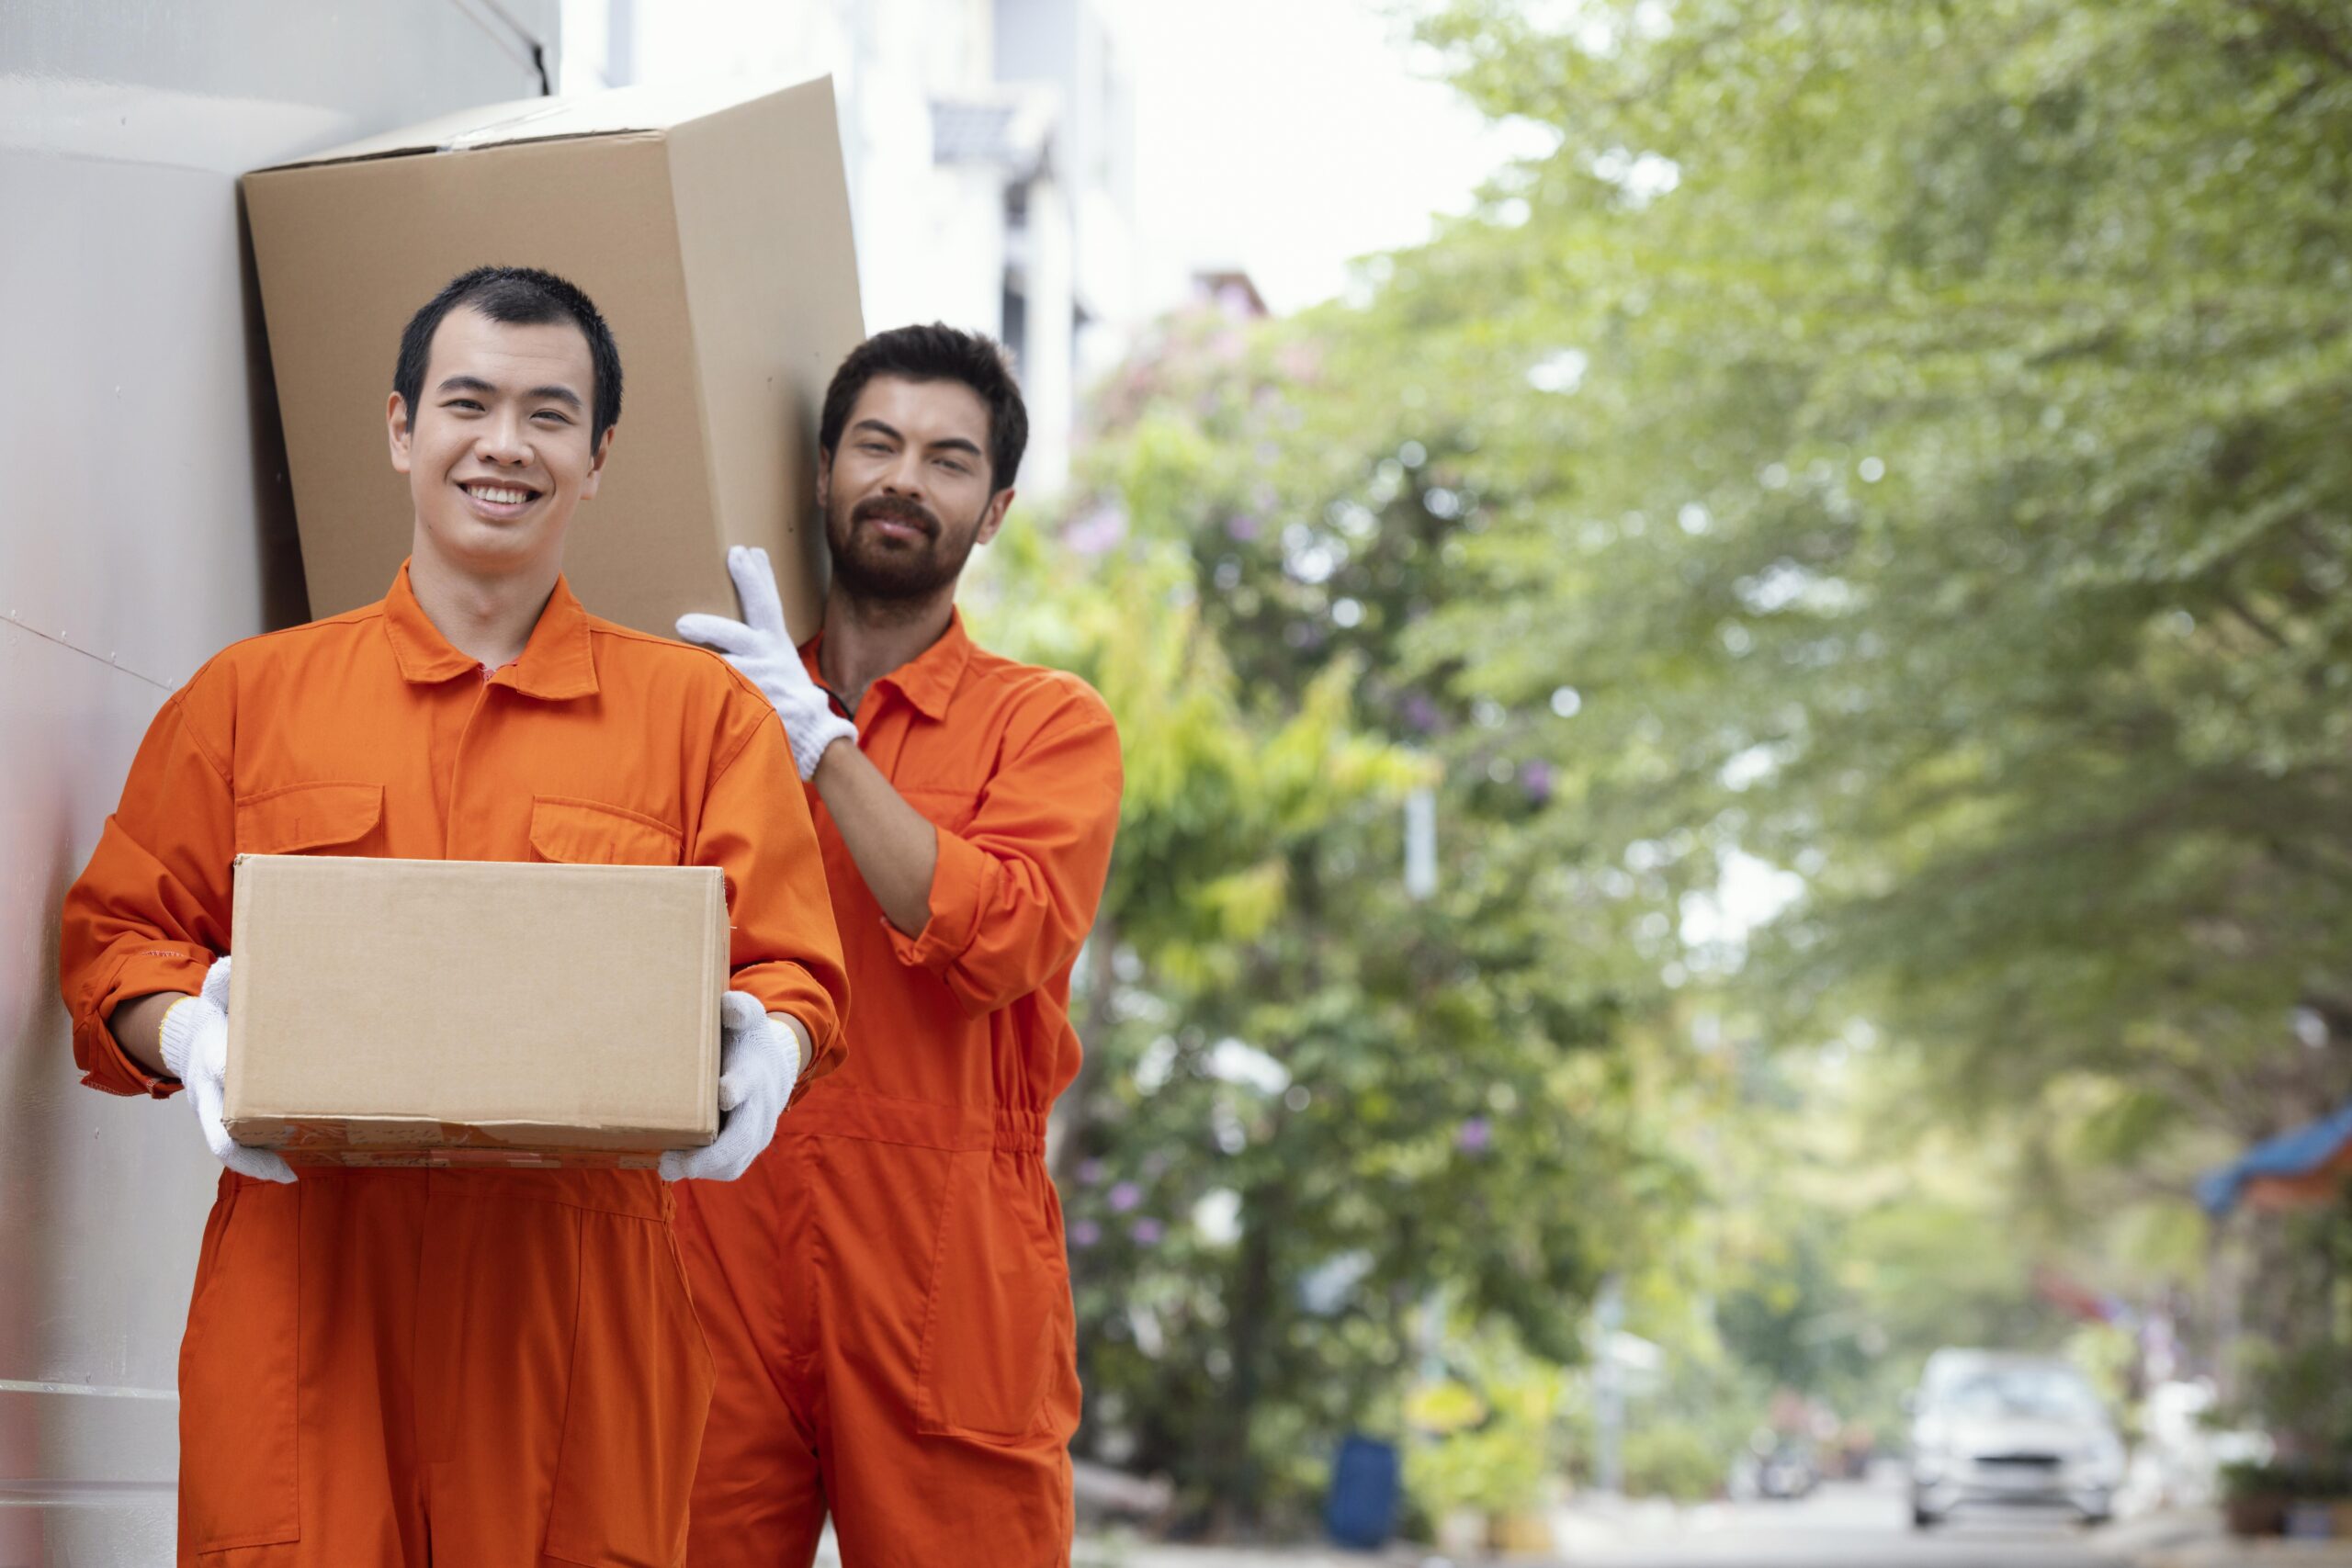 Packers and Movers in Qatar